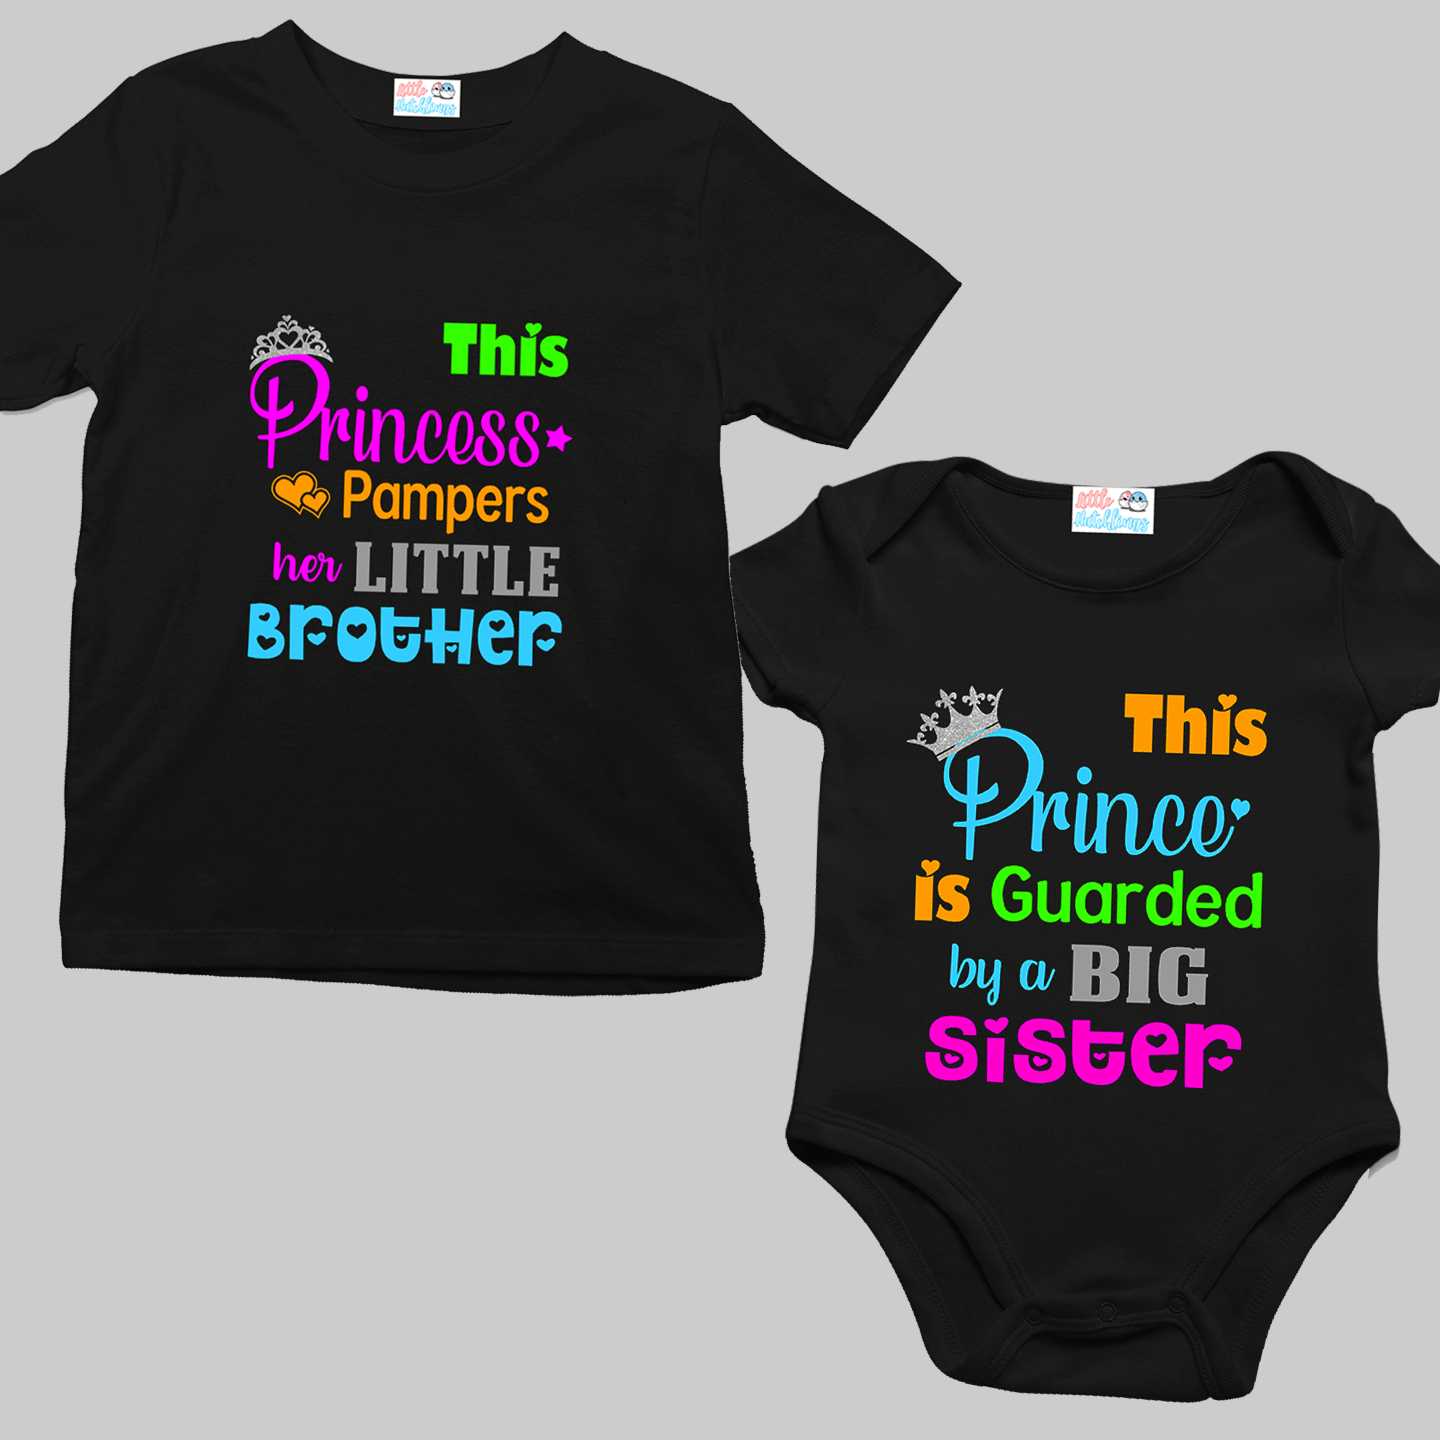 Princess Pampers Lil Bro + Prince Guarded by Big Sis Black Onesie Tshirt Combo